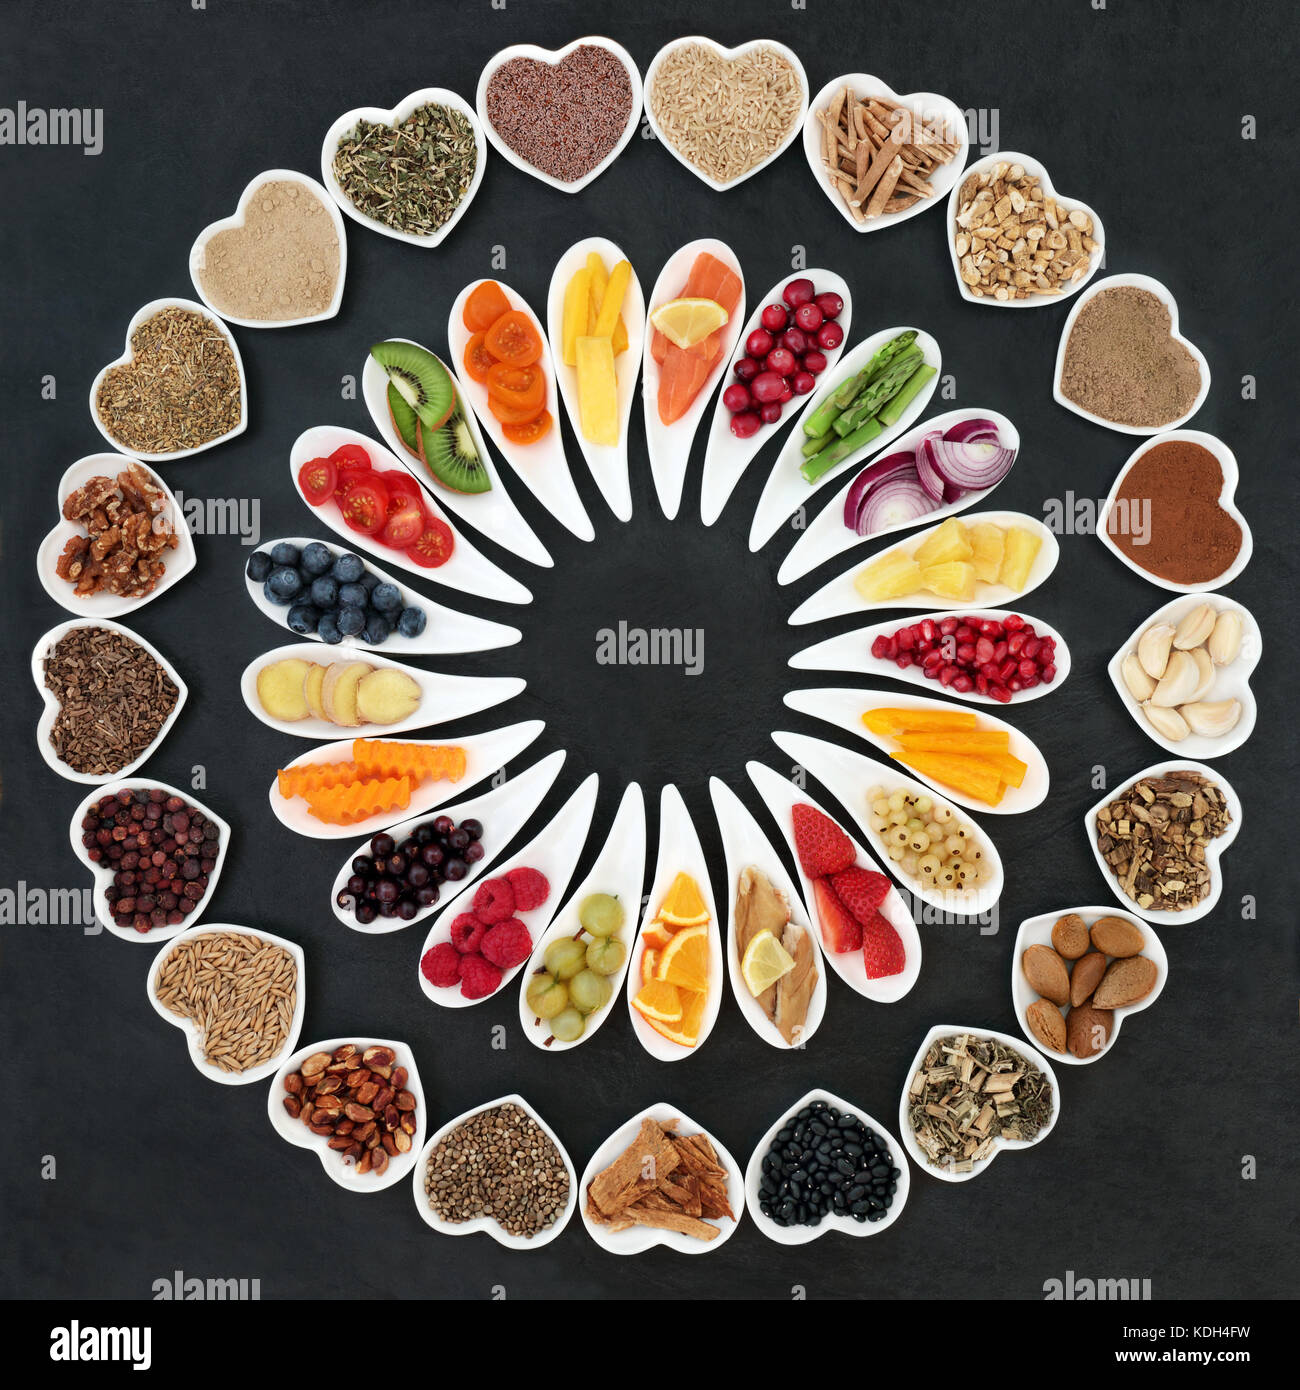 Health food wheel for a healthy heart concept with vegetables, fruit, fish, nuts, seeds, supplement powders, cereal and herbs for herbal medicine. Stock Photo